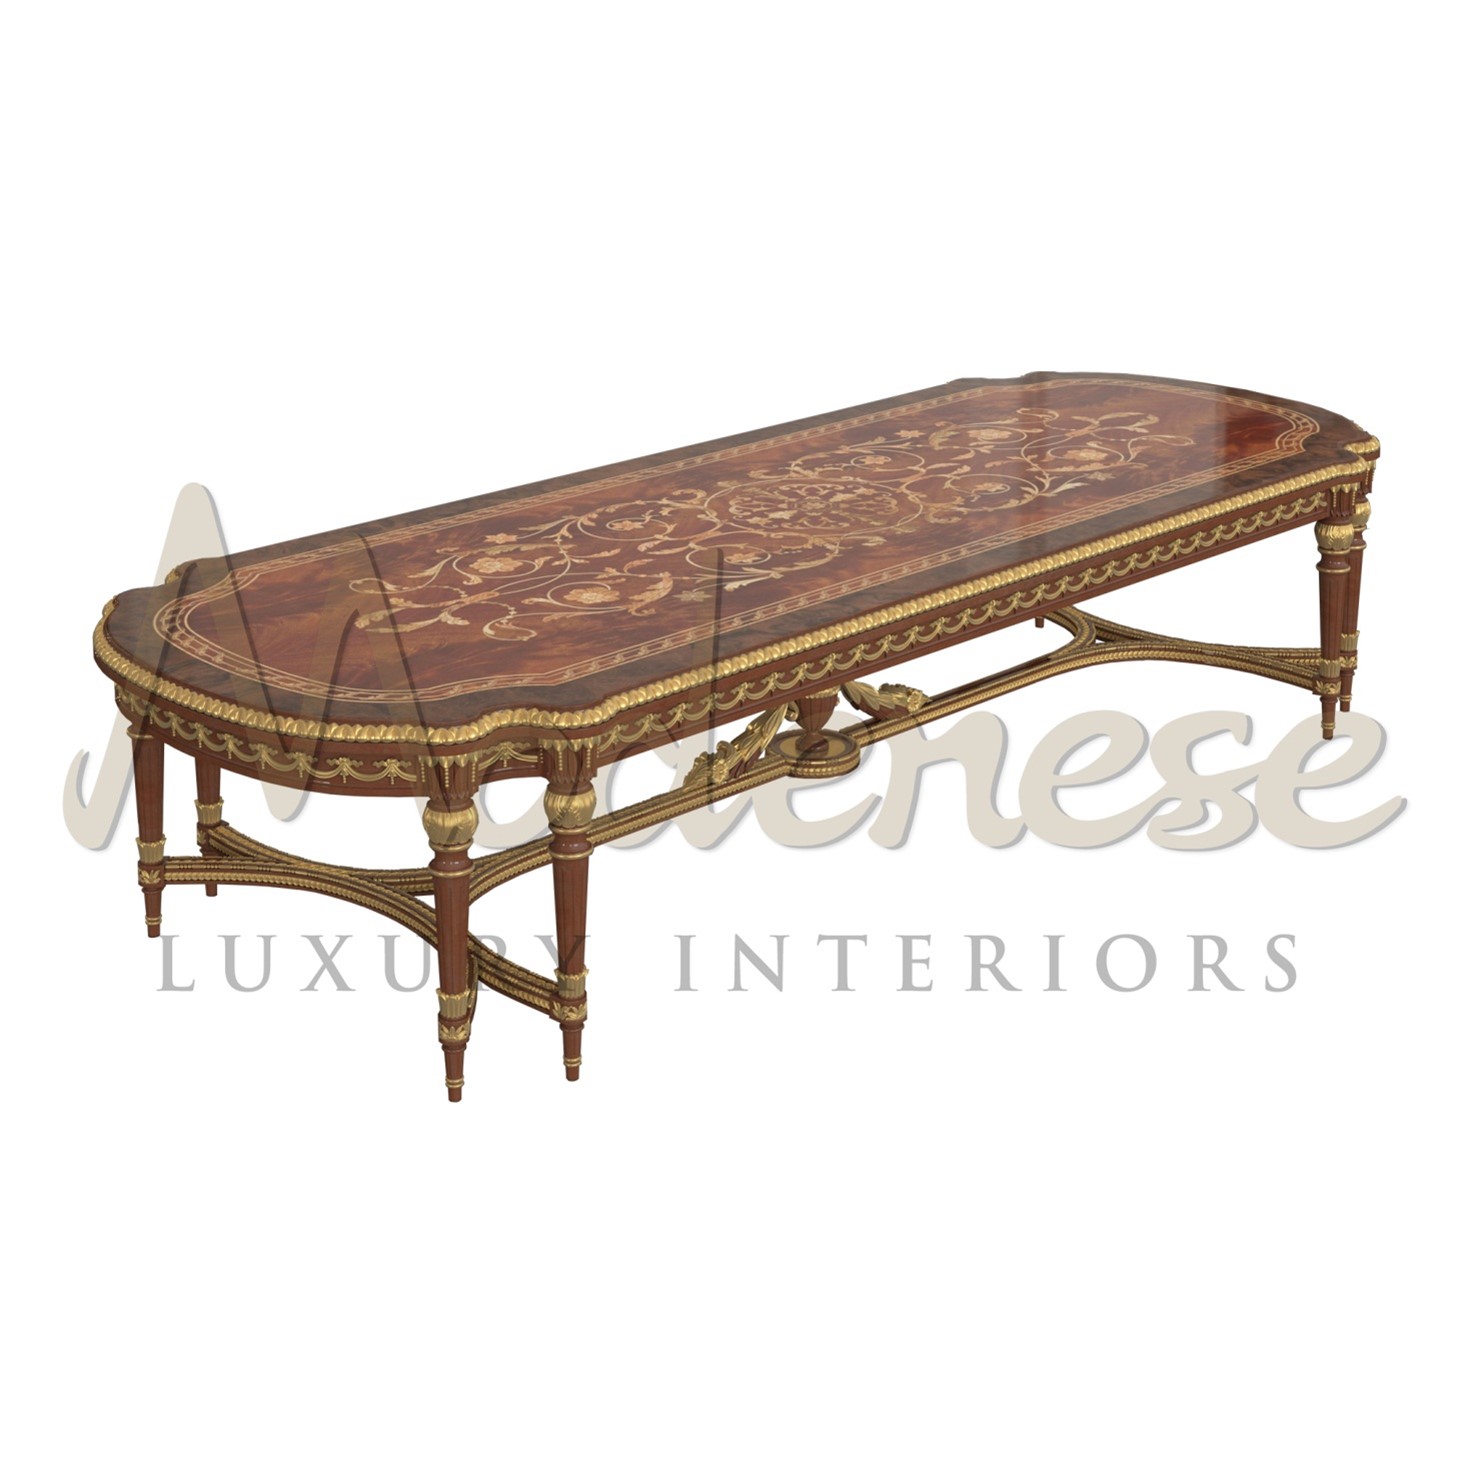 Classic Luxury Furniture from Modenese Gastone Luxury Interiors Designed For Sophisticated Living